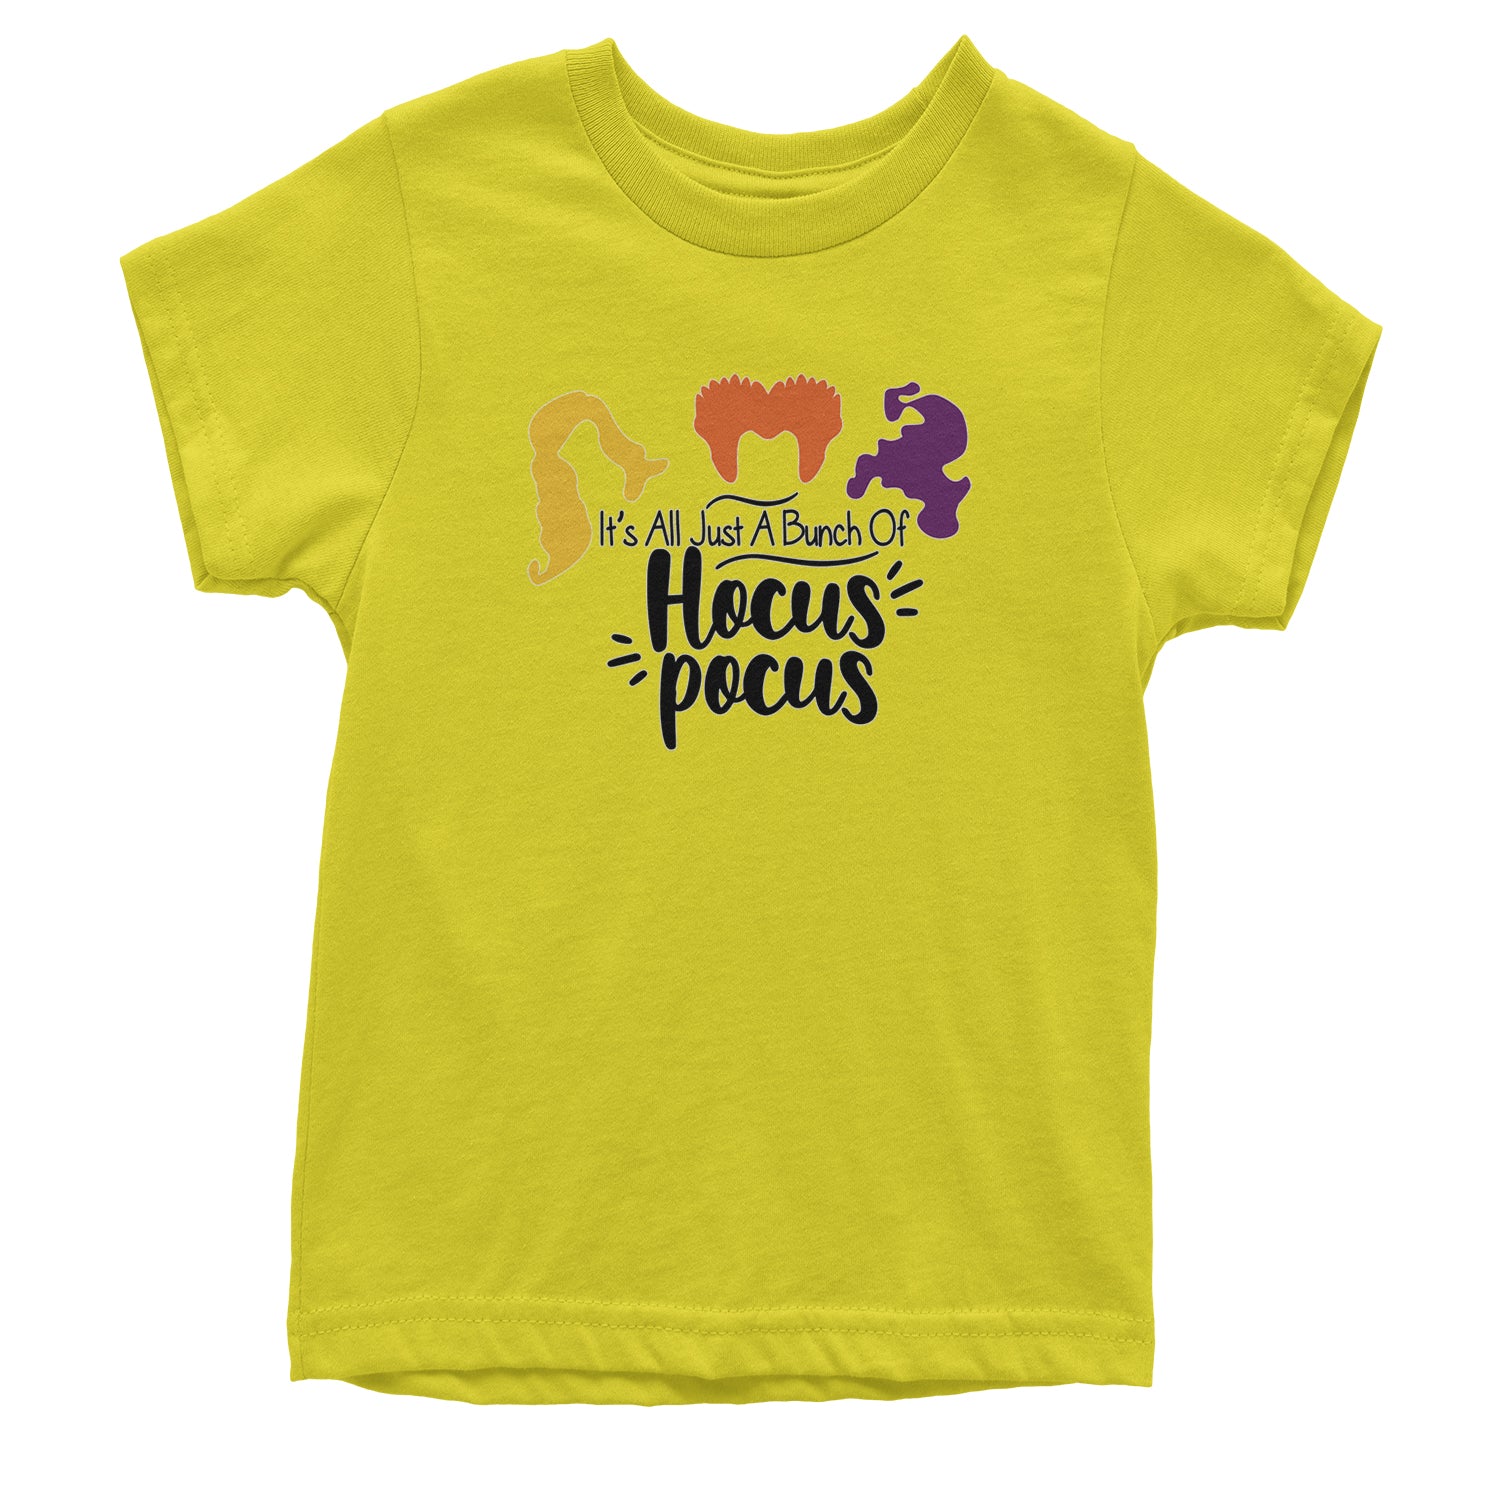 It's Just A Bunch Of Hocus Pocus Youth T-shirt descendants, enchanted, eve, hallows, hocus, or, pocus, sanderson, sisters, treat, trick, witches by Expression Tees